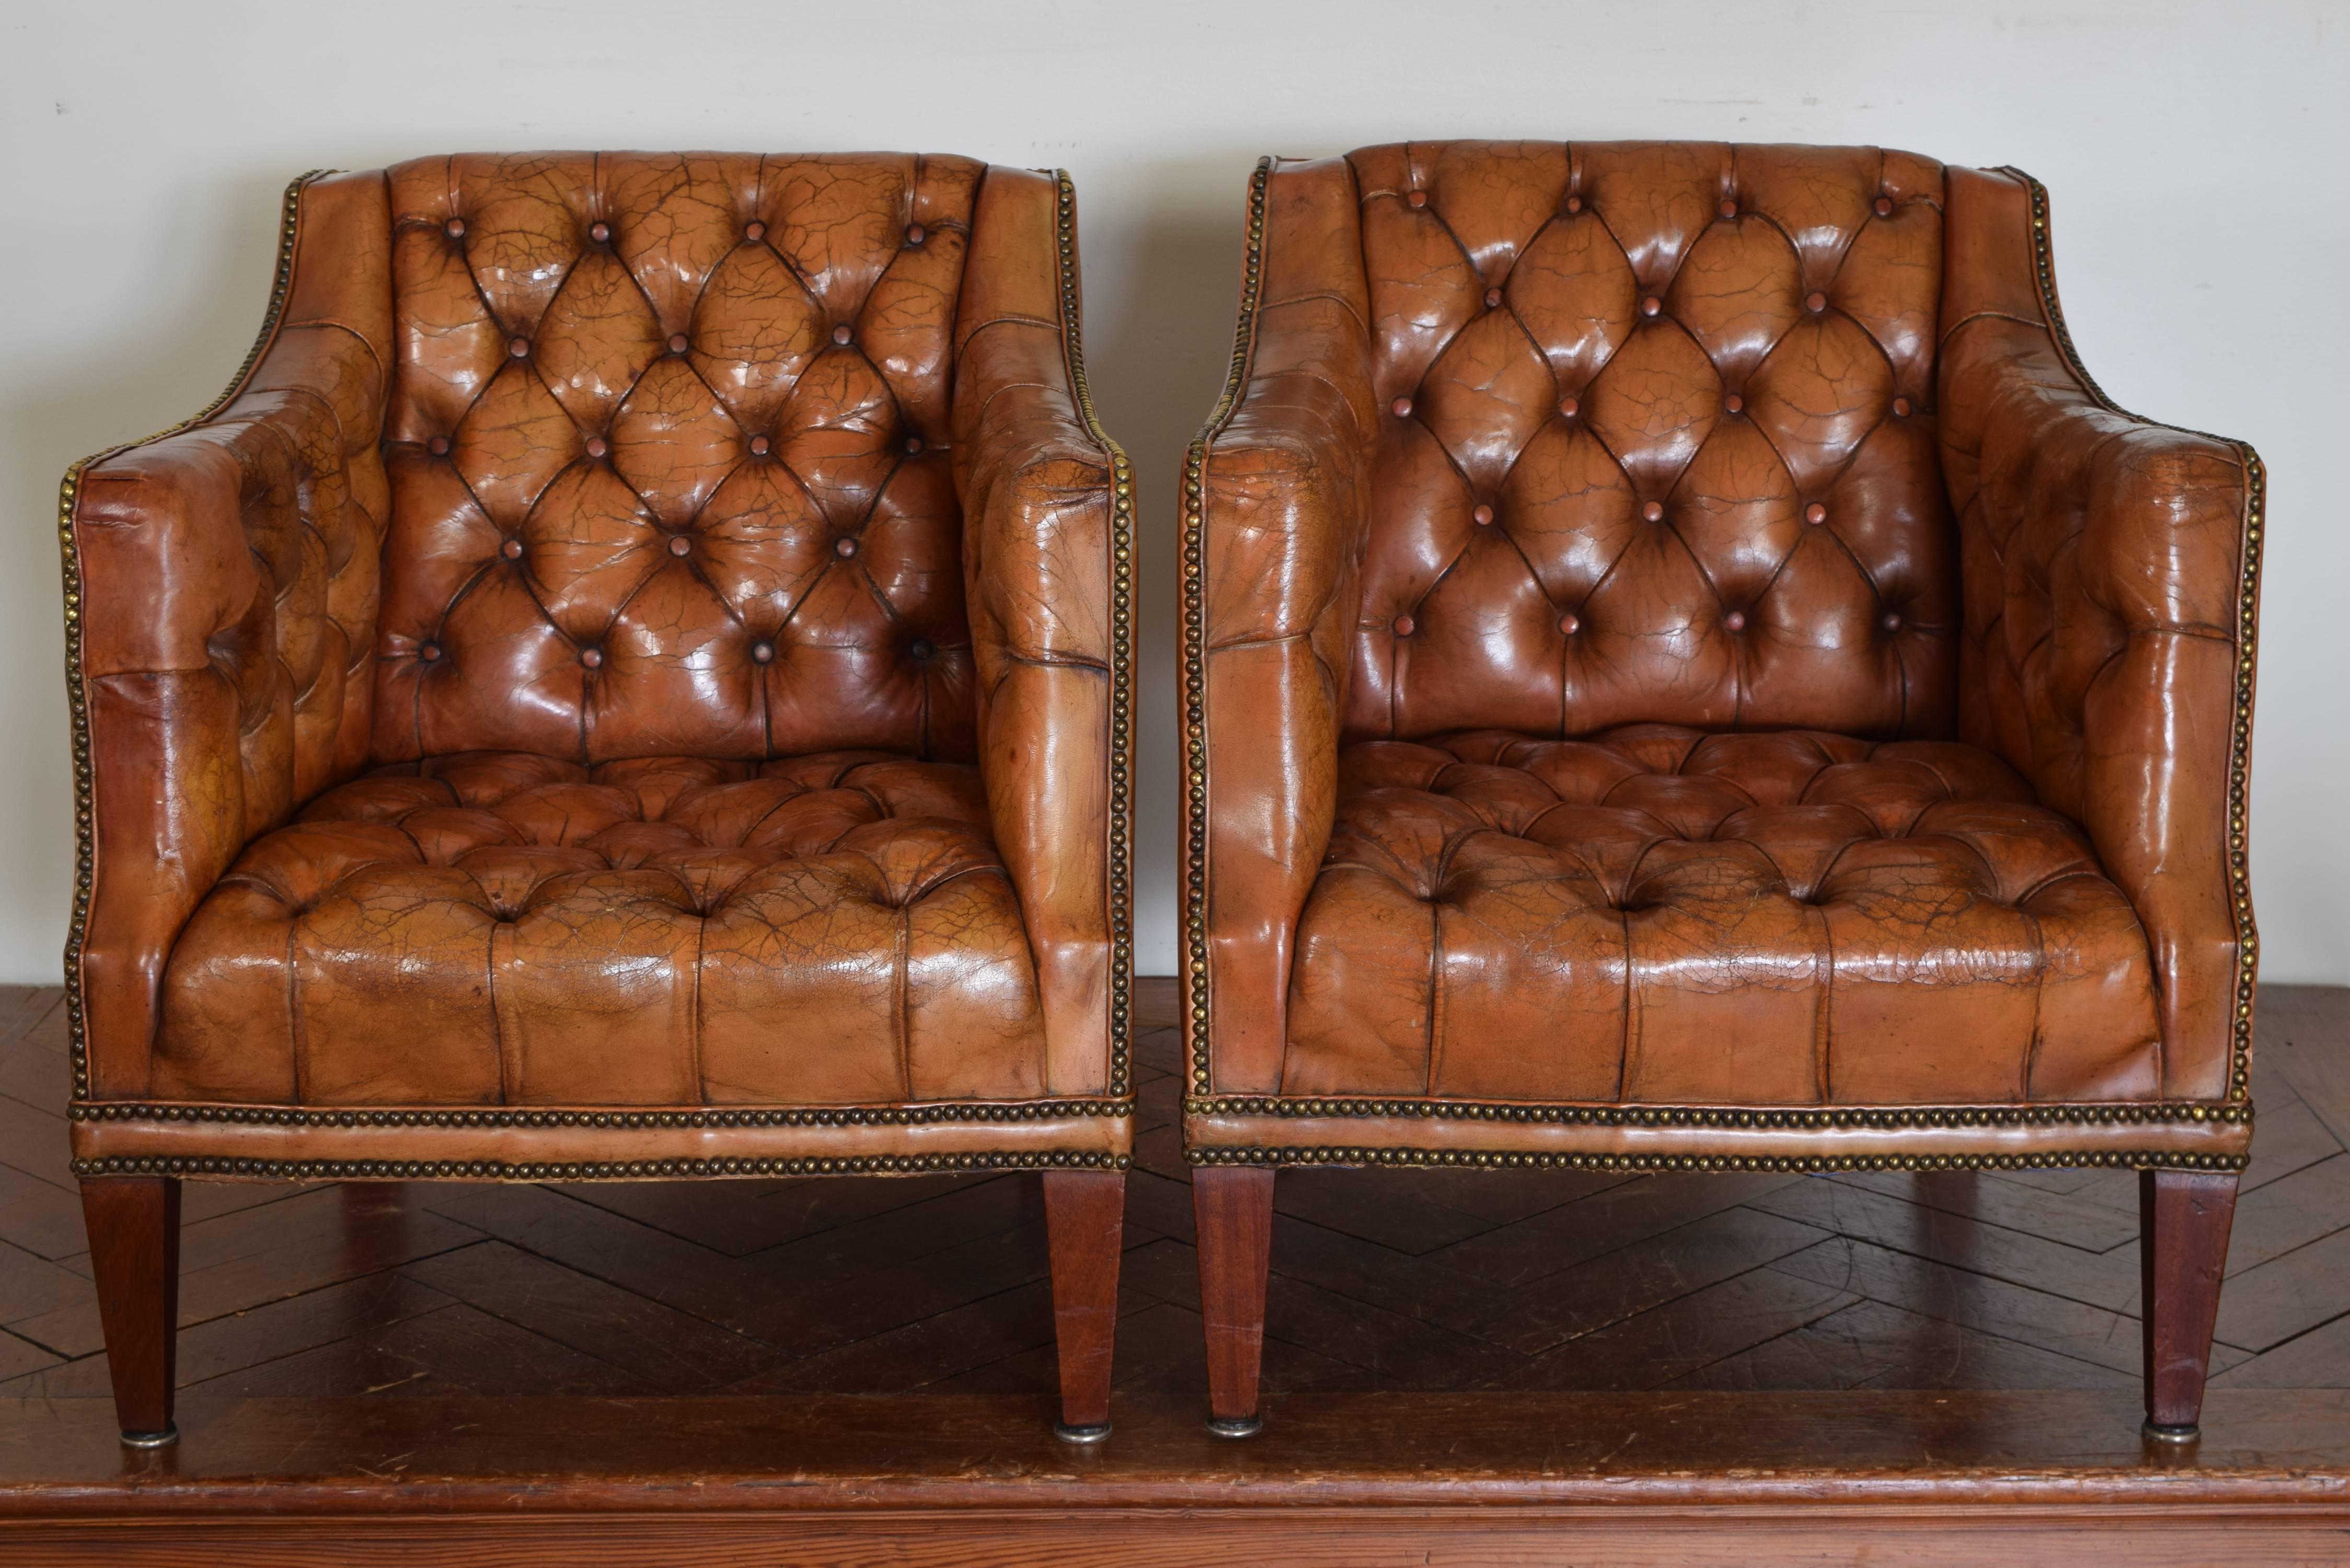 From the first half of the 20th century, having square back and shaped sides, the interiors upholstered in tufted leather, the sides and back panels upholstered in leather, trimmed in patinated brass nailheads, raised on square tapering legs.